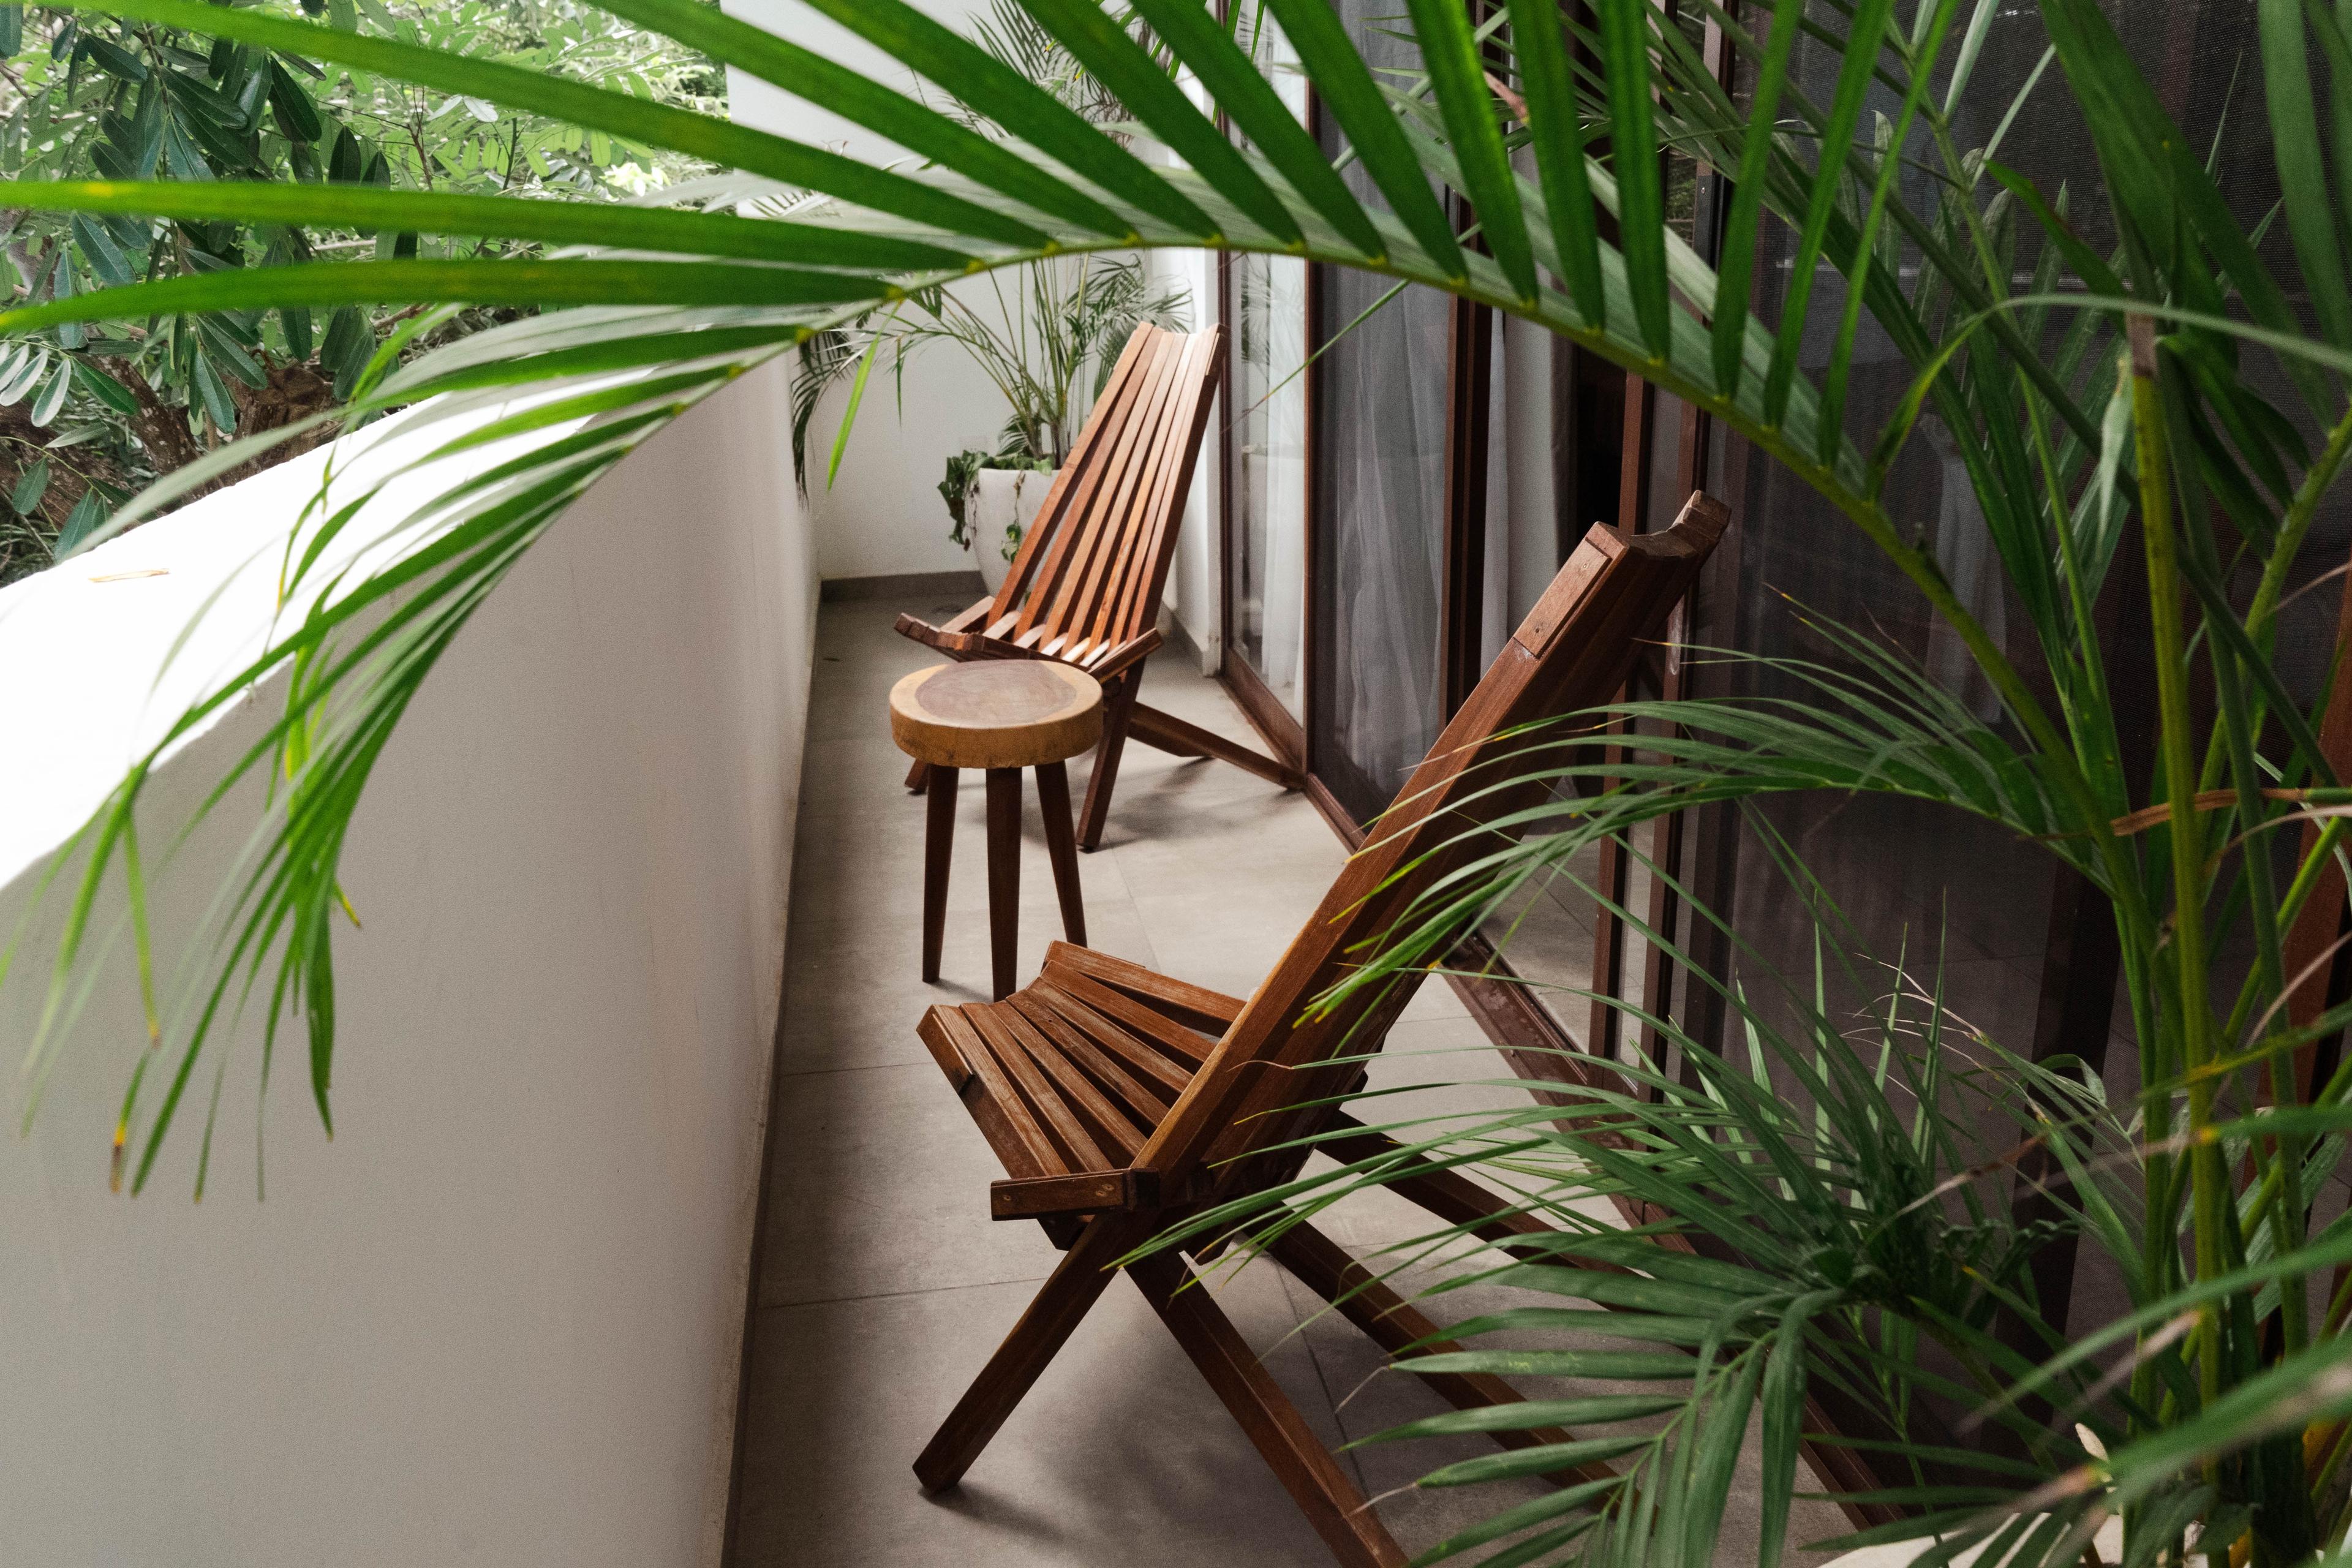 Beige terrace with two wooden chairs and palm loooking plants